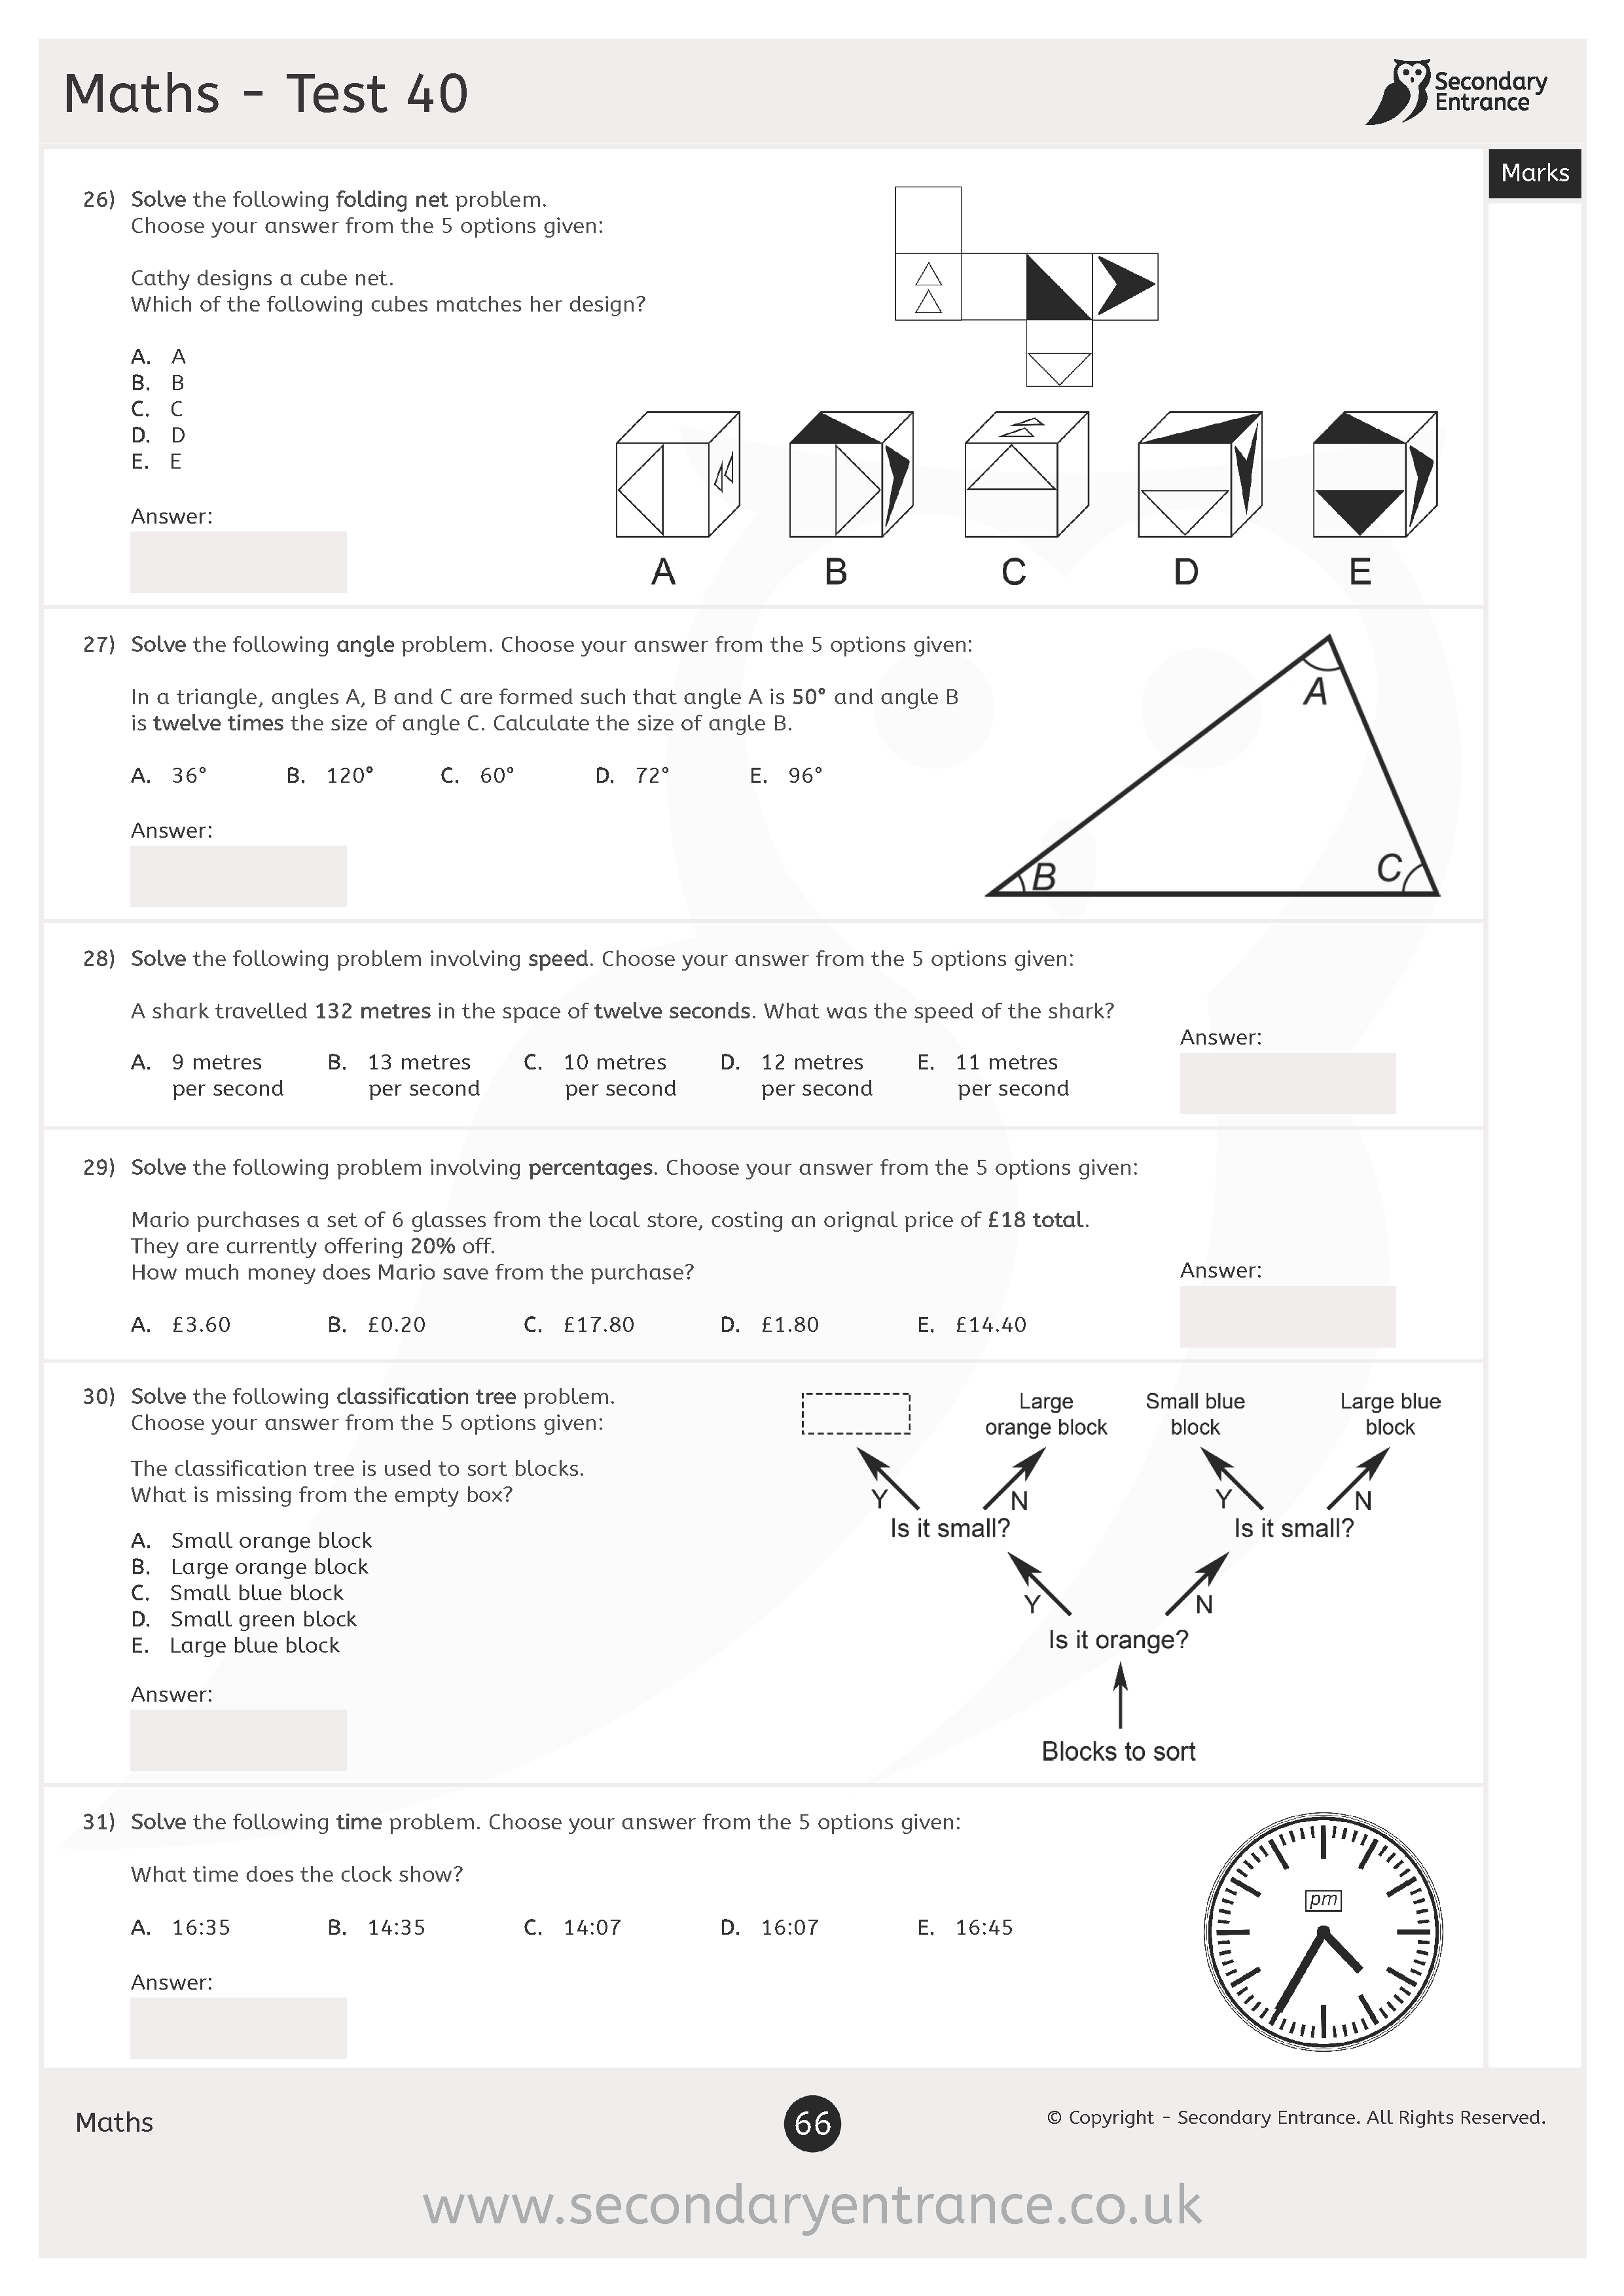 Maths sample paper for 11+ exams